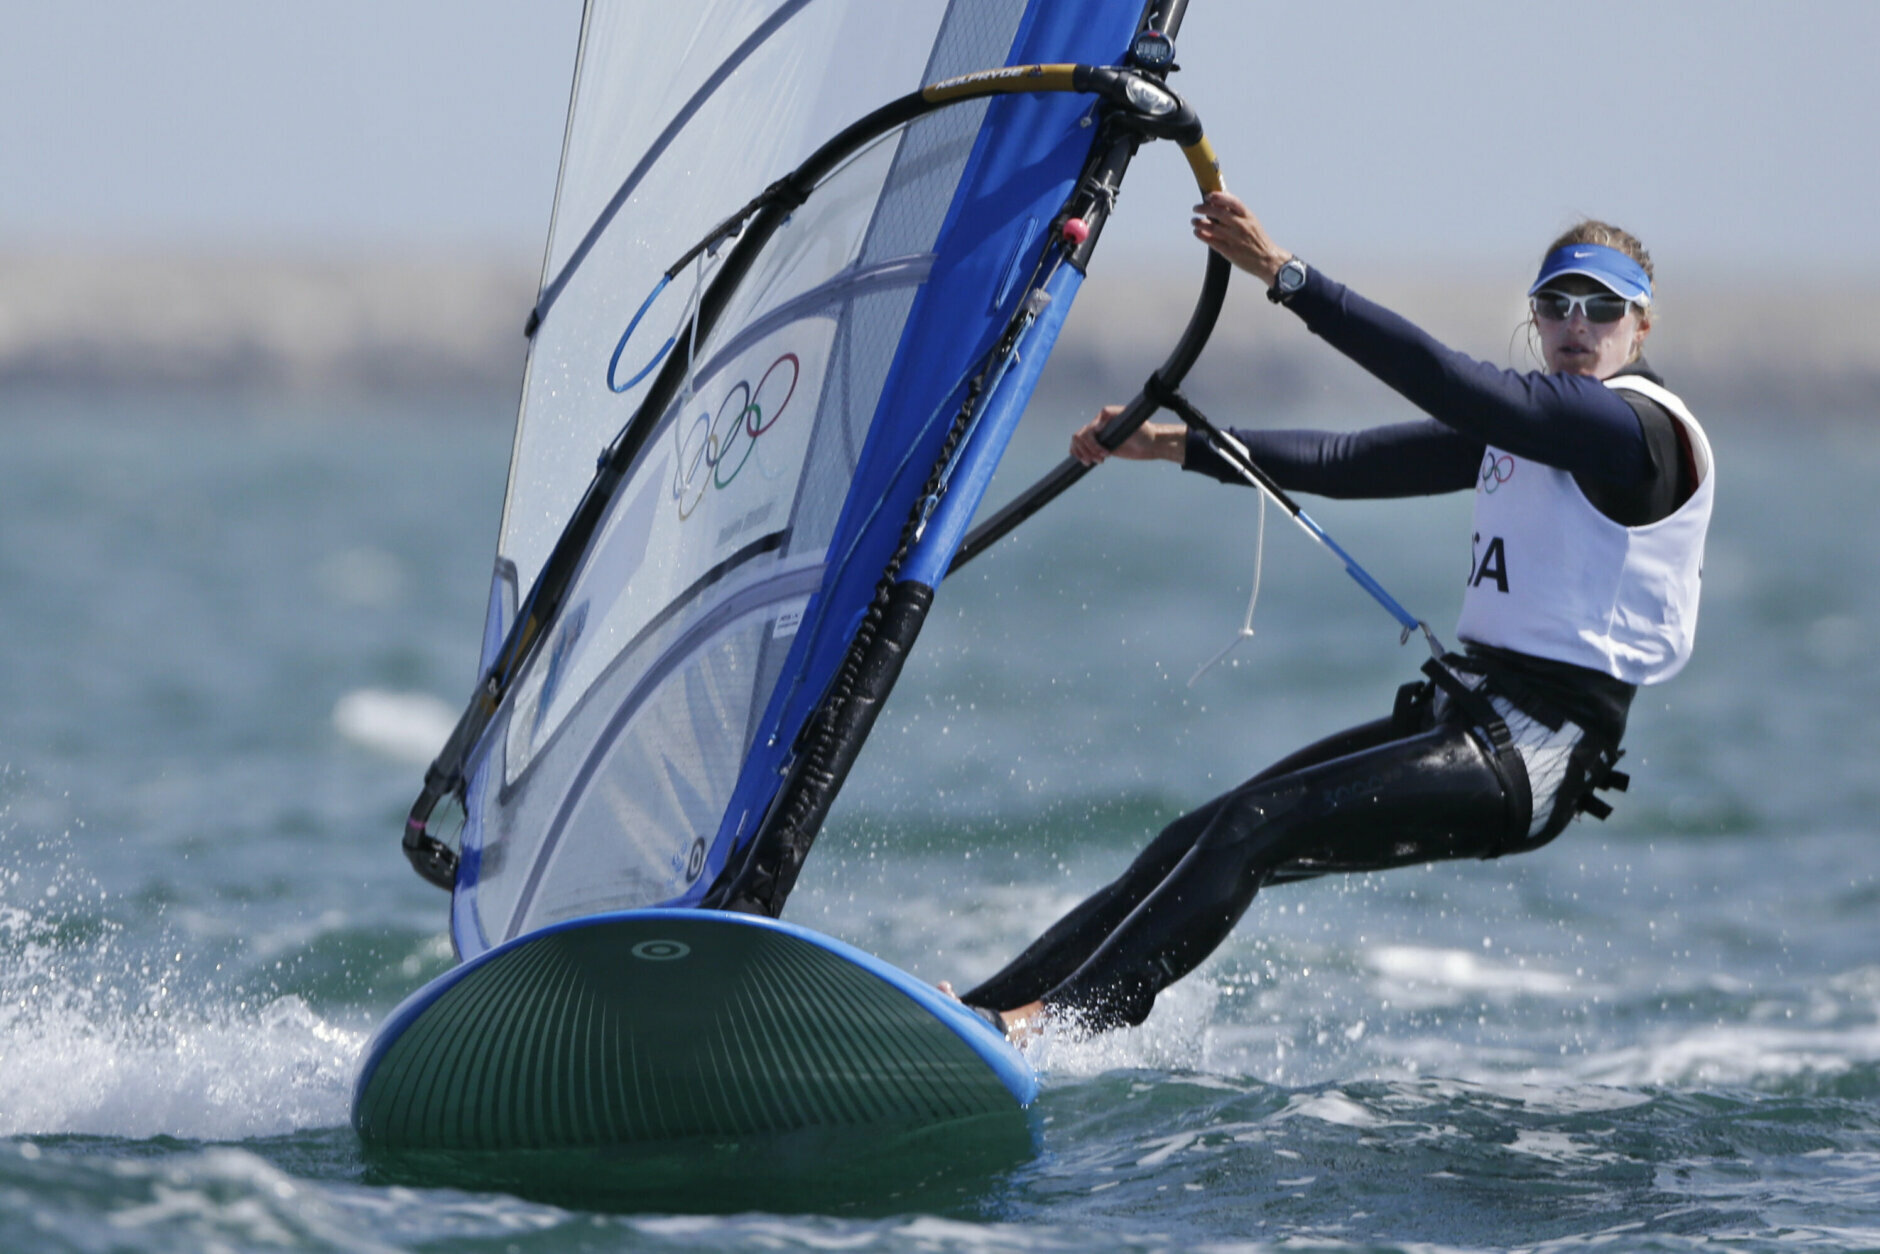 <p><strong>Farrah Hall (Annapolis, Maryland) — Windsurfing</strong></p>
<p><strong>Notable facts:</strong> Hall is competing in her second Olympics after a disappointing finish in 2012, but told WTOP that this time around, &#8220;I&#8217;m really, really happy with how I&#8217;m sailing right now and I really don&#8217;t think I&#8217;ve sailed better than right now.&#8221;</p>
<p>Hall, who found windsurfing as a youth along the Magothy River in Cape St. Claire, is confident in a good result in Tokyo because she&#8217;s refined her technique in the nine years since the London Olympics and &#8220;I&#8217;m an experienced athlete now. I was more on the rookie side in 2012.&#8221;</p>
<p><strong>Competition:</strong> Women&#8217;s RS: X — July 26-31</p>
<p><strong>Results</strong>: 15th place</p>
<p><em>Read more about Hall <a href="https://wtop.com/news/2012/07/locals-in-london-area-athletes-go-for-gold/" target="_blank" rel="noopener">from 2012</a> and <a href="https://wtop.com/olympics/2021/07/2020-olympic-profile-farrah-hall-makes-olympic-return/" target="_blank" rel="noopener">the upcoming 2020 Summer Games</a>.</em></p>
